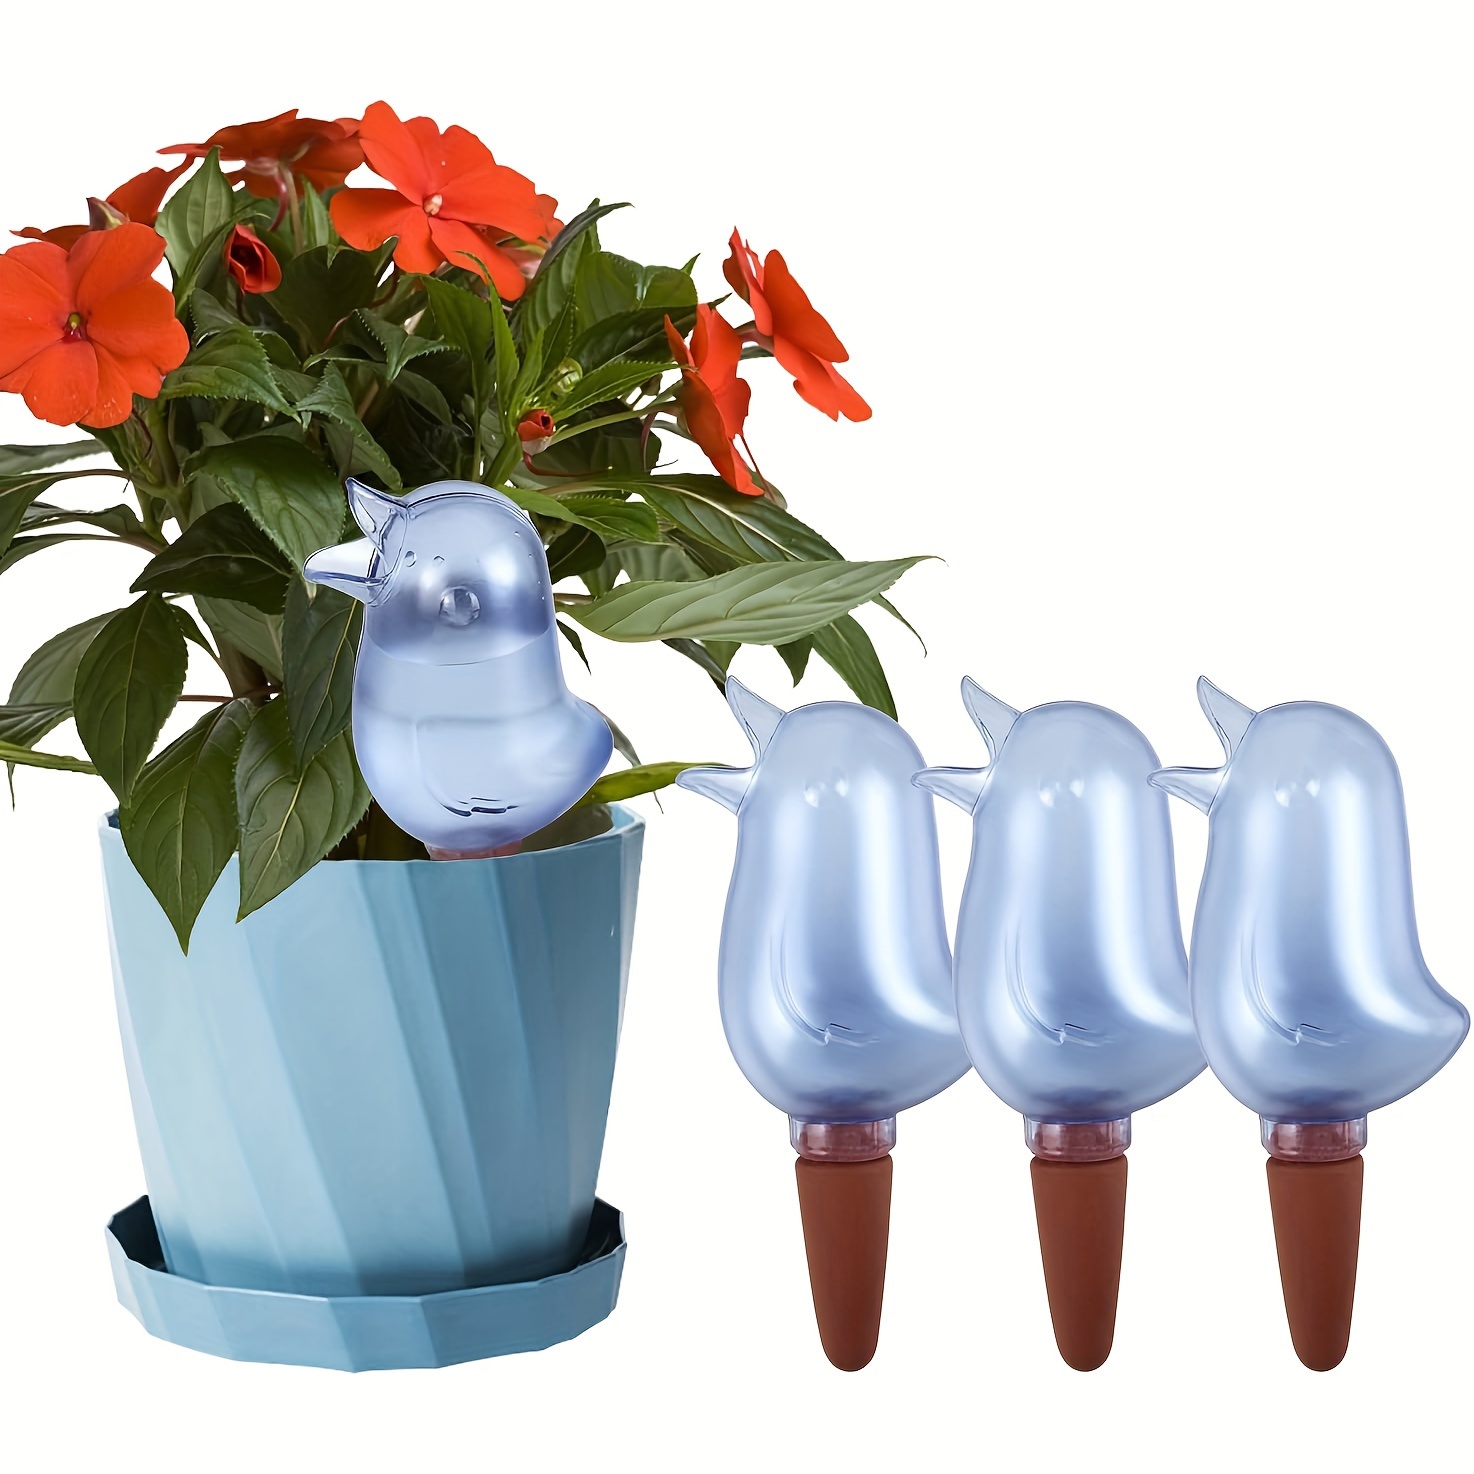 

4-piece Automatic Self-watering Spikes - Easy Plant Waterer & Irrigation System For Indoor/outdoor Potted Plants And Flowers